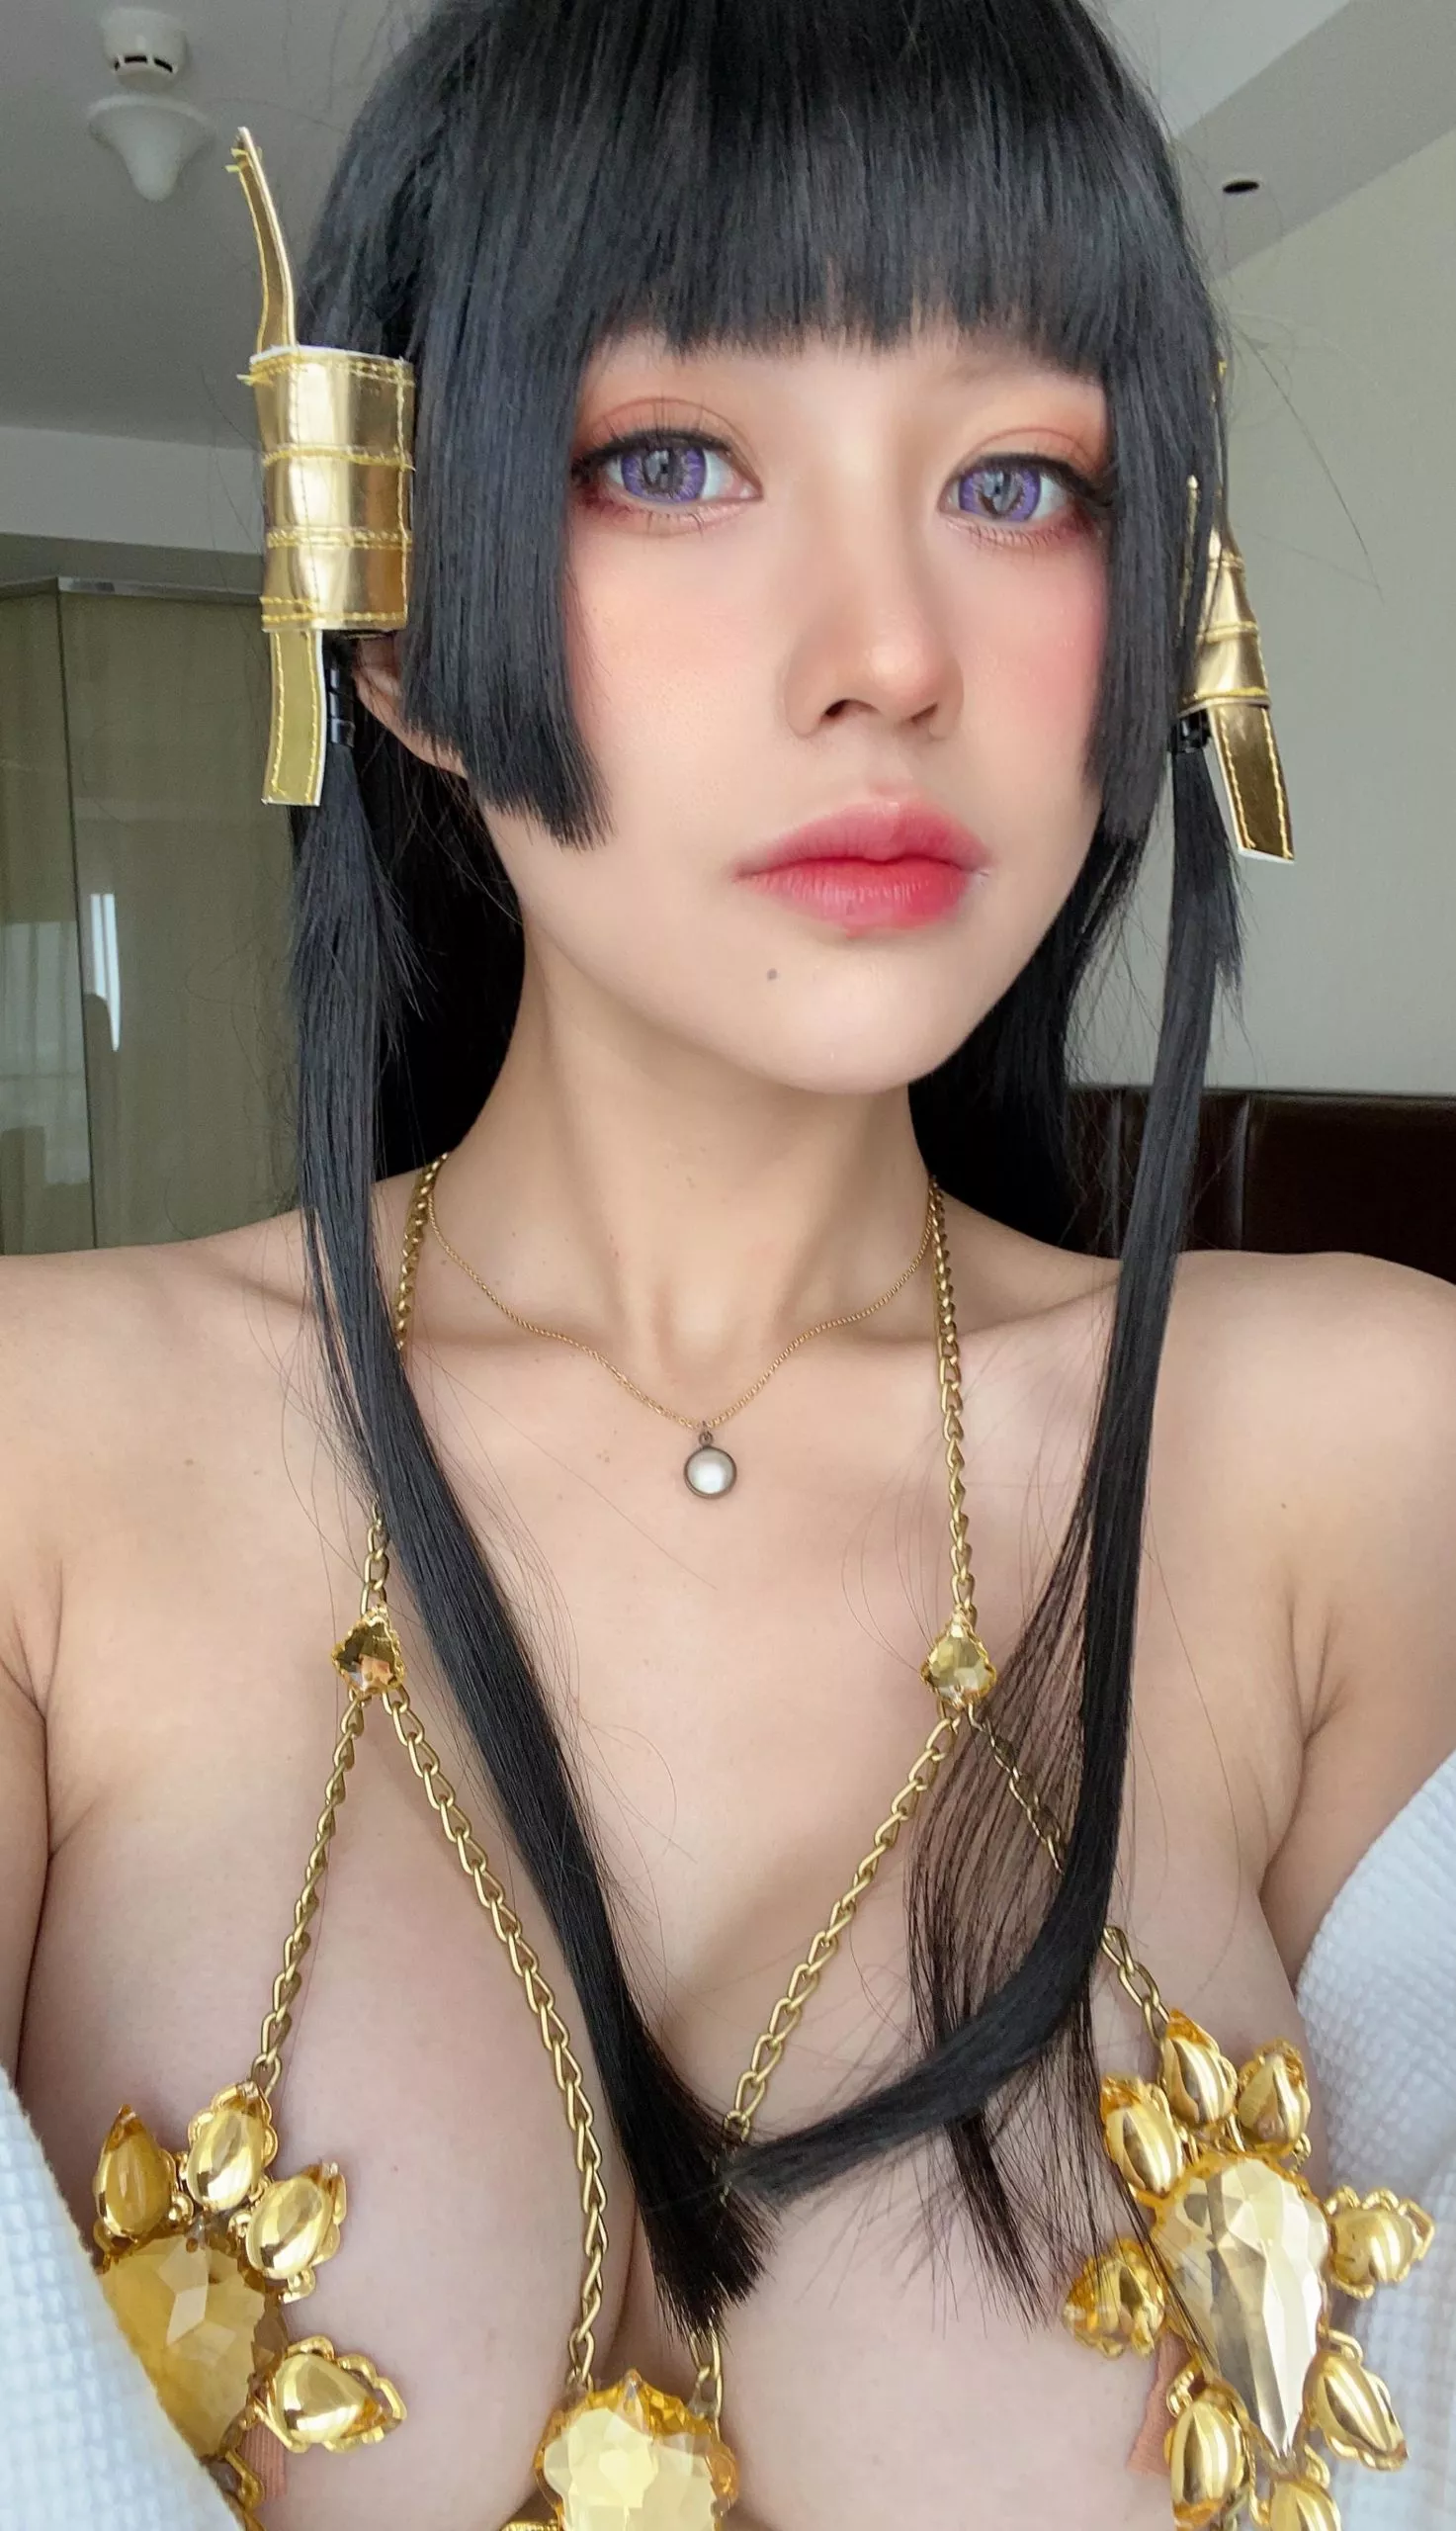 DeadorAlive Nyotengu Cosplay by PingPing 2022 42 scaled 1